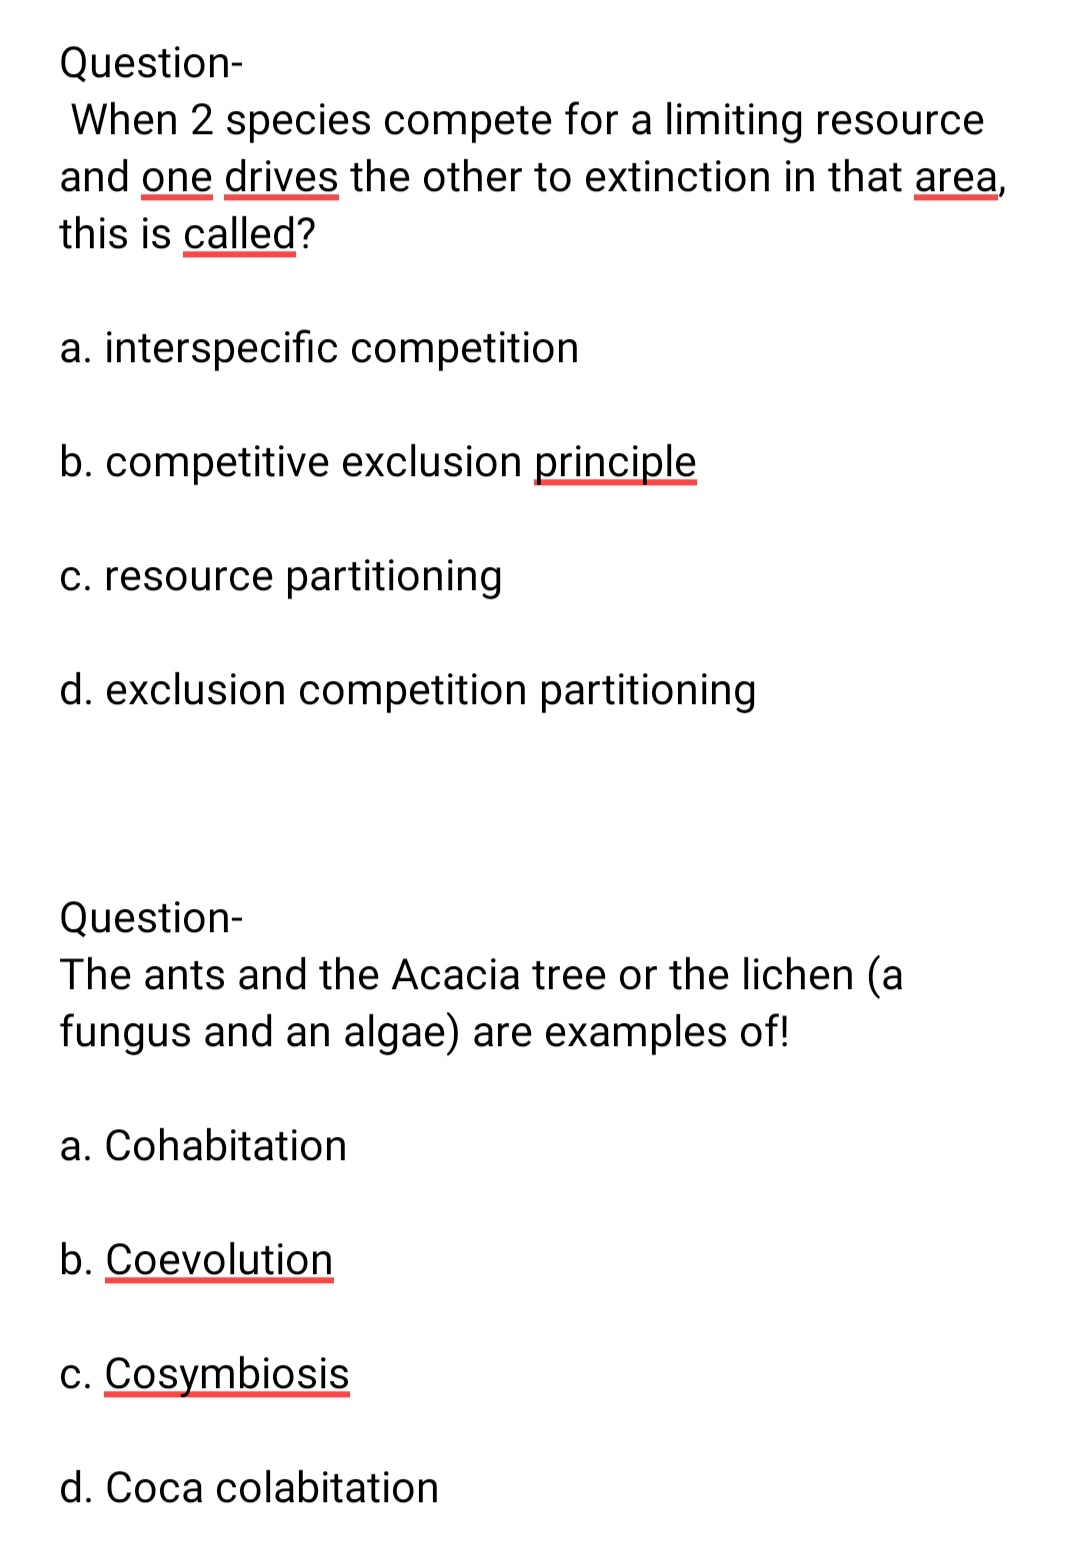 Question-
When 2 species compete for a limiting resource
and one drives the other to extinction in that area,
this is called?
a. interspecific competition
b. competitive exclusion principle
c. resource partitioning
d. exclusion competition partitioning
Question-
The ants and the Acacia tree or the lichen (a
fungus and an algae) are examples of!
a. Cohabitation
b. Coevolution
c. Cosymbiosis
d. Coca colabitation